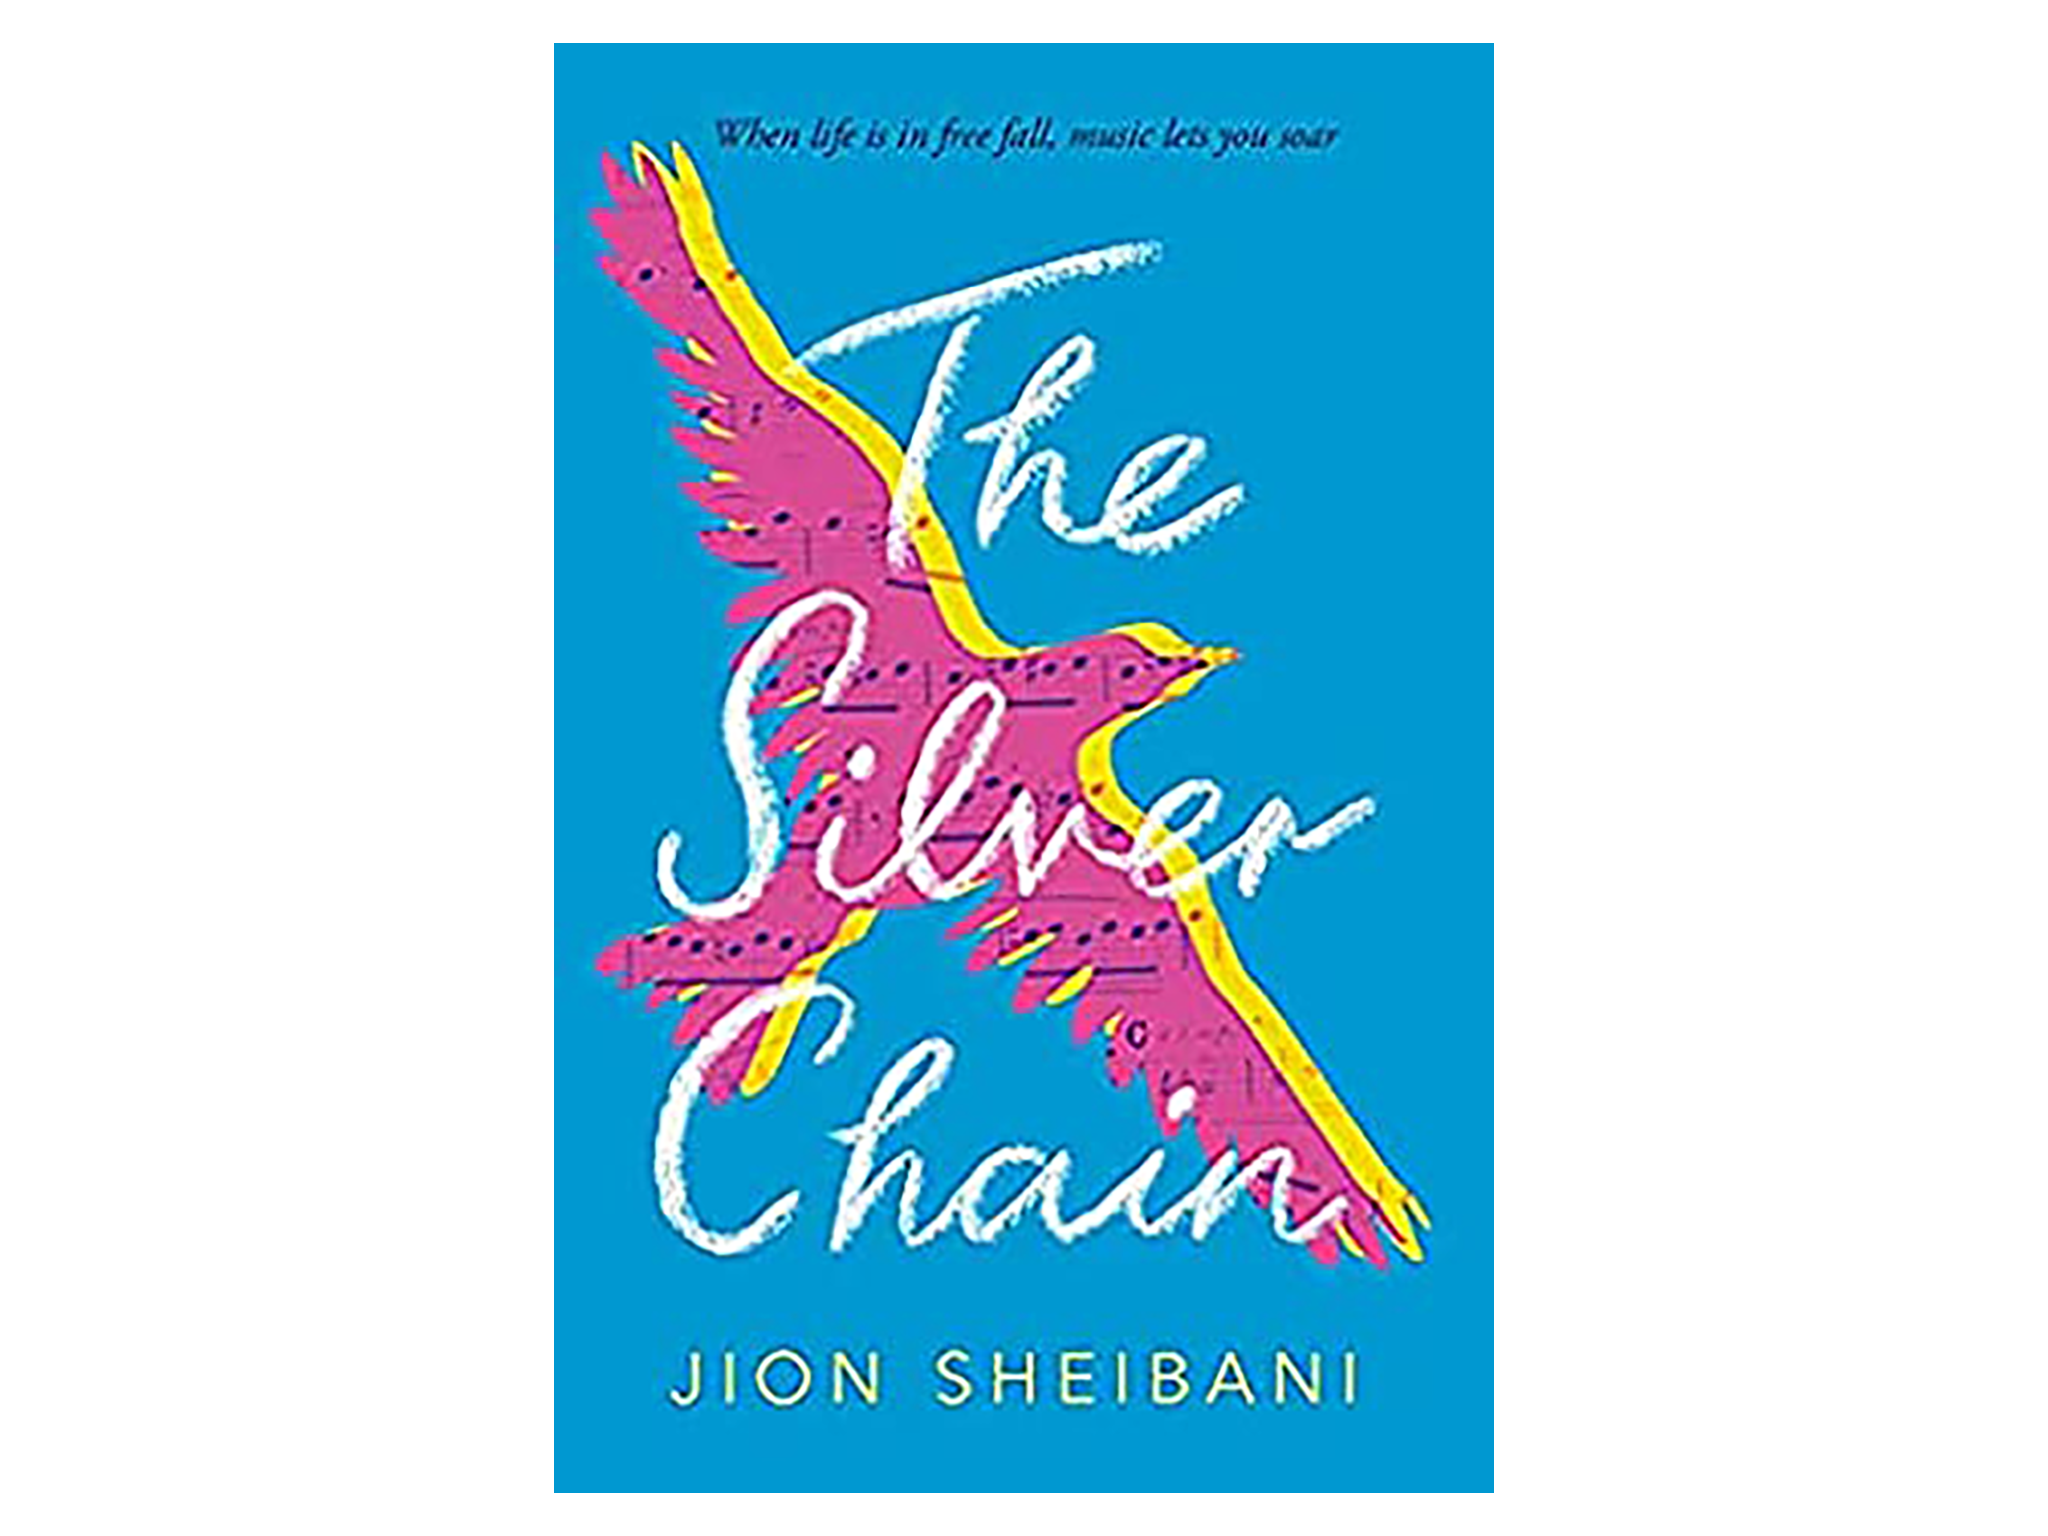 The Silver Chain by Jion Sheibani